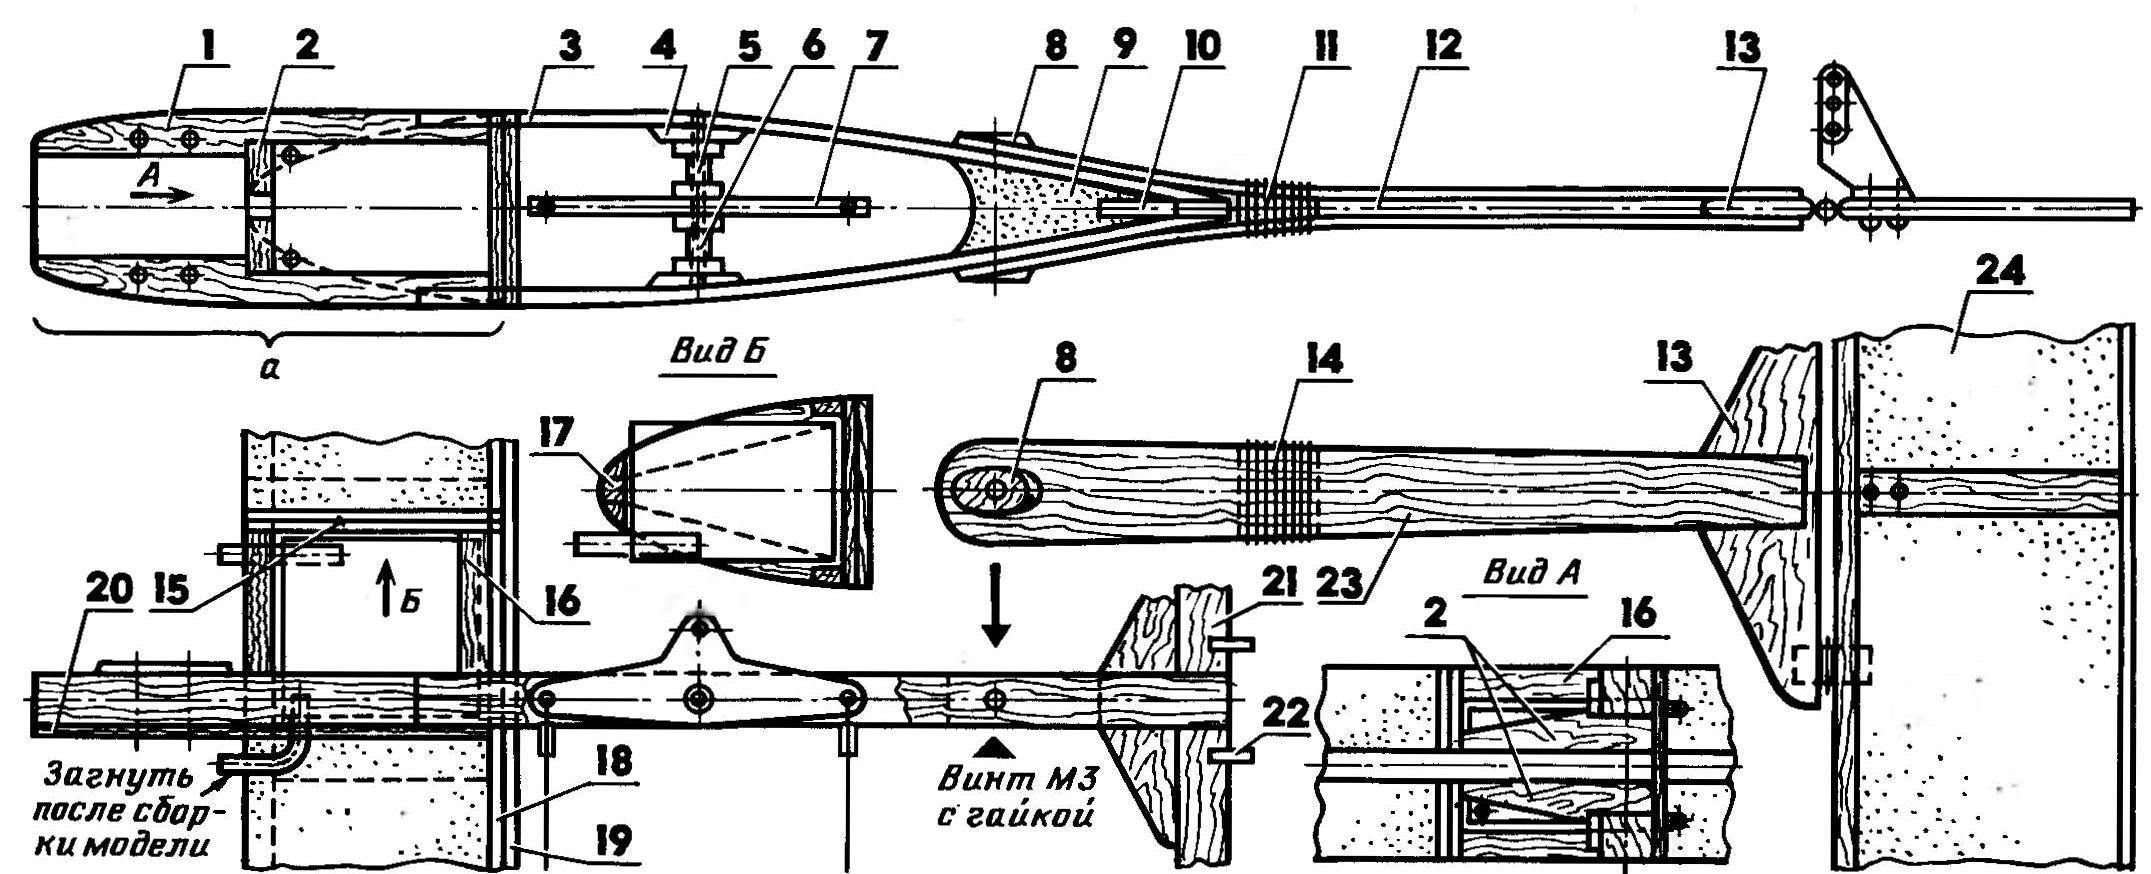 Fig. 2. The power part of the model and the Central rib of the wing